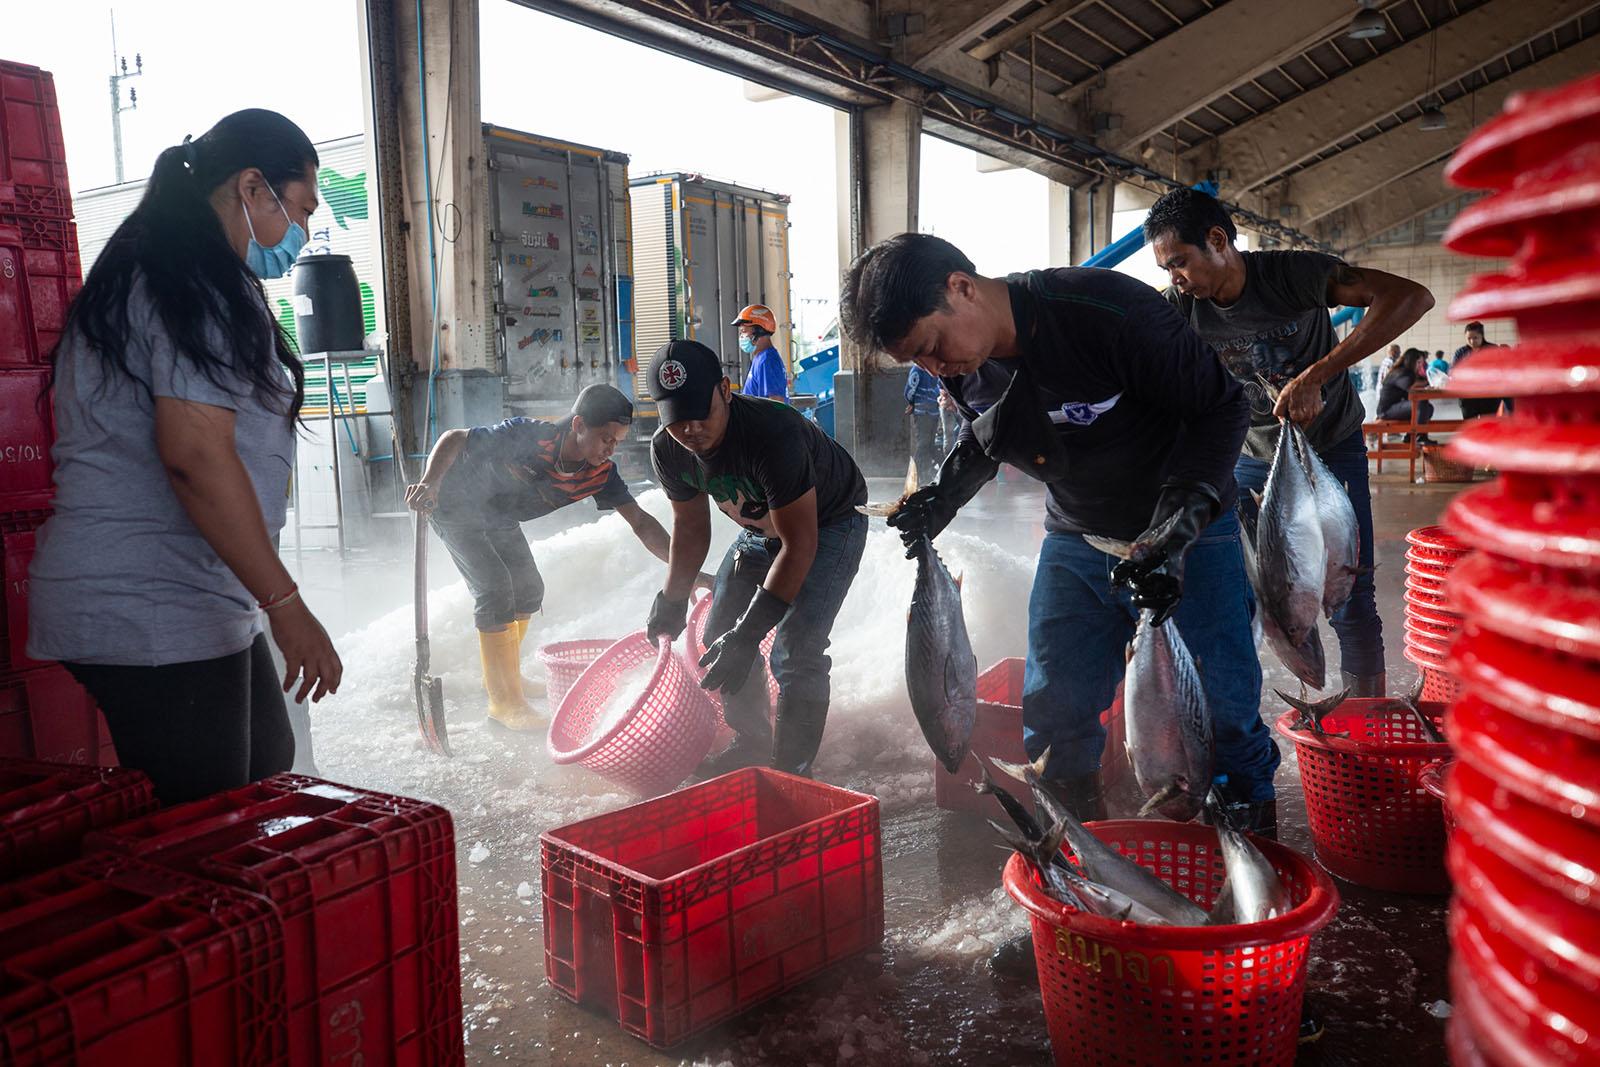 LIFE ON THE OTHER SIDE - Phuket Port, Phuket - Migrant workers separate the catch...